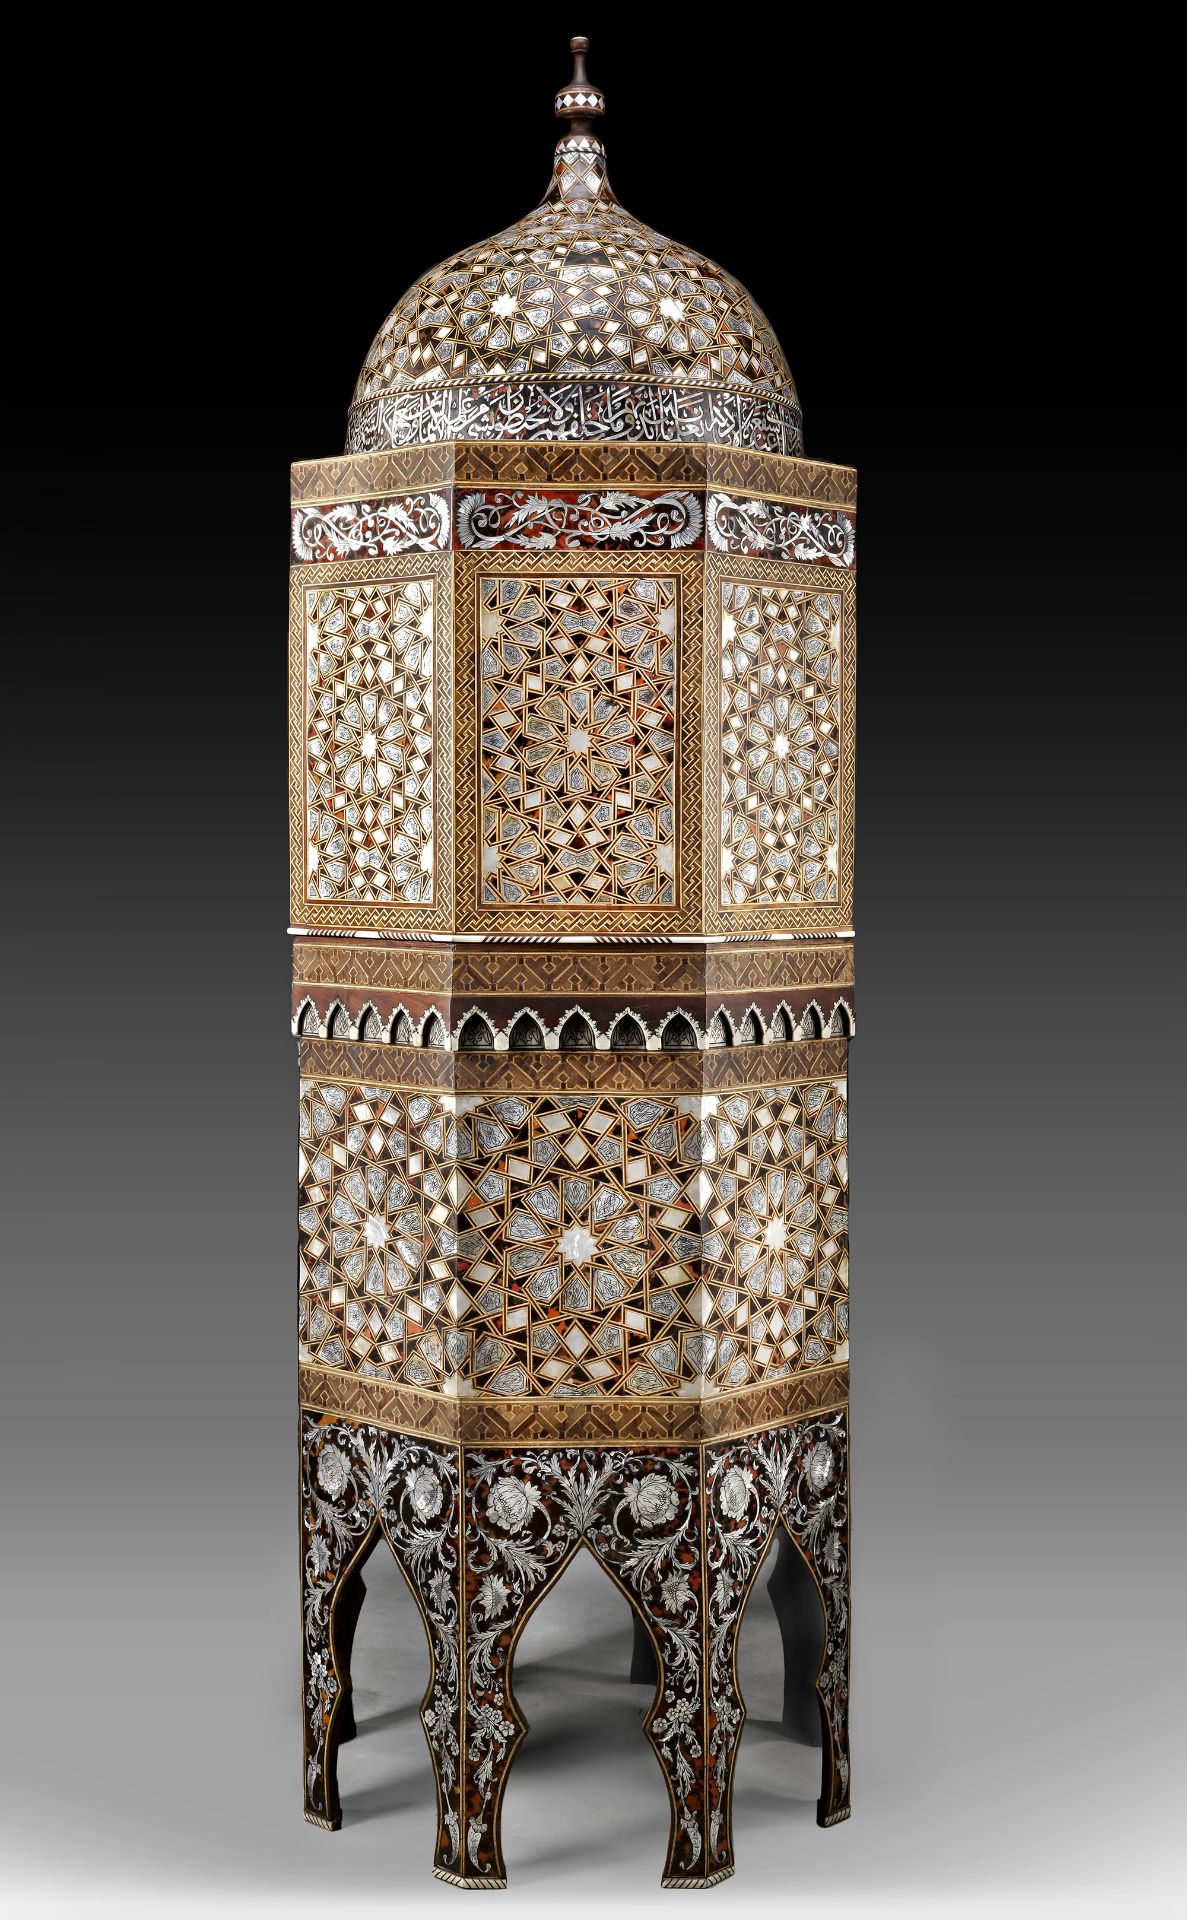 A TORTOISESHELL AND MOTHER-OF-PEARL OCTAGONAL CABINET, TURKEY OR SYRIA, EARLY 20TH CENTURY - Image 8 of 10